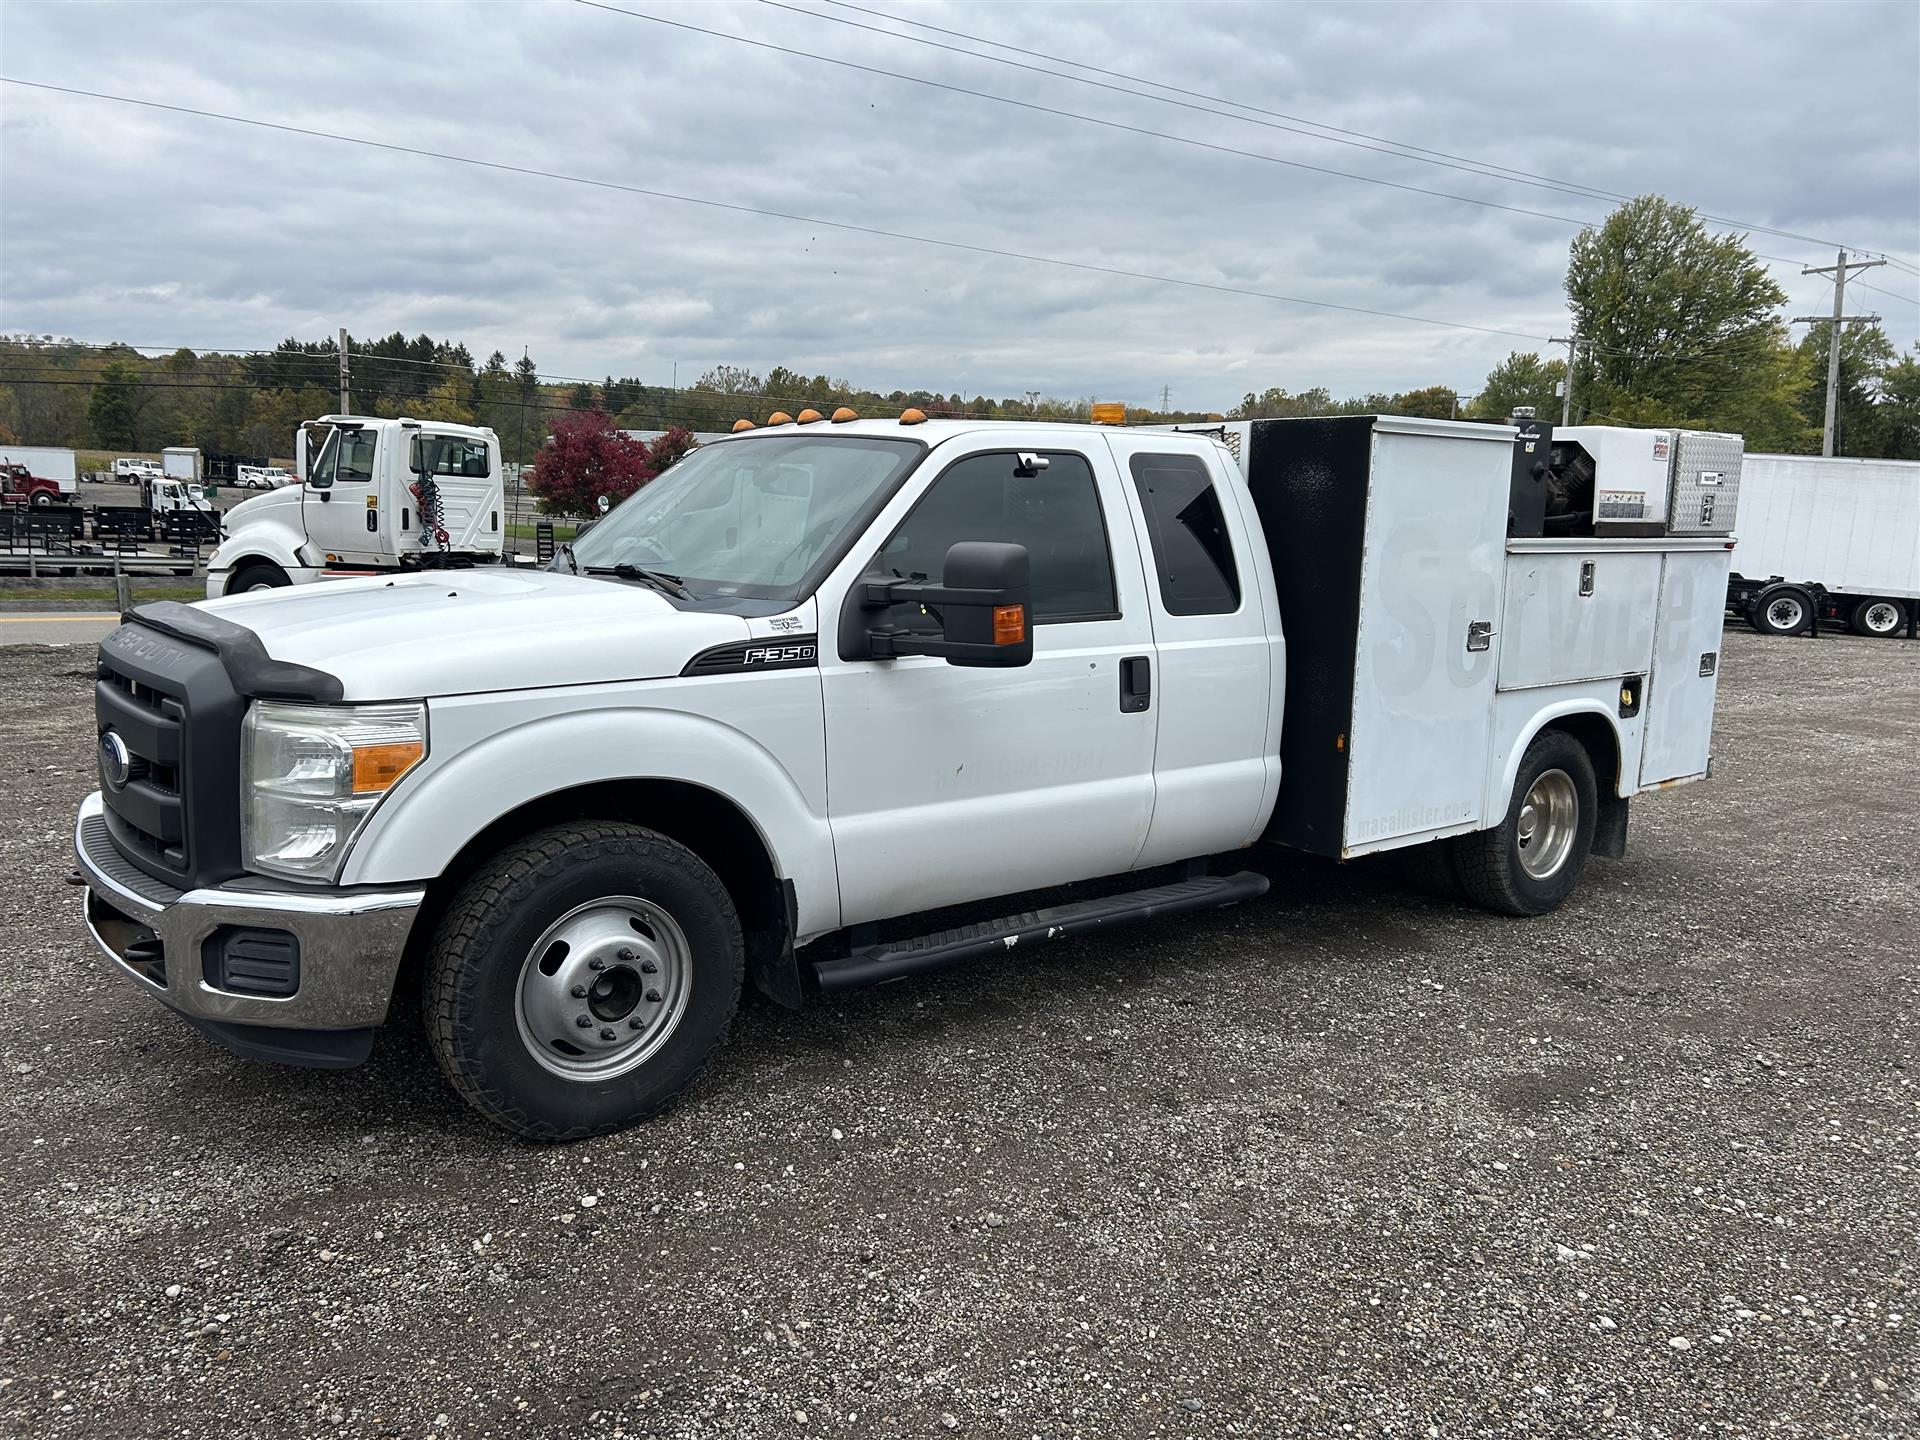 2011 Ford- F-350